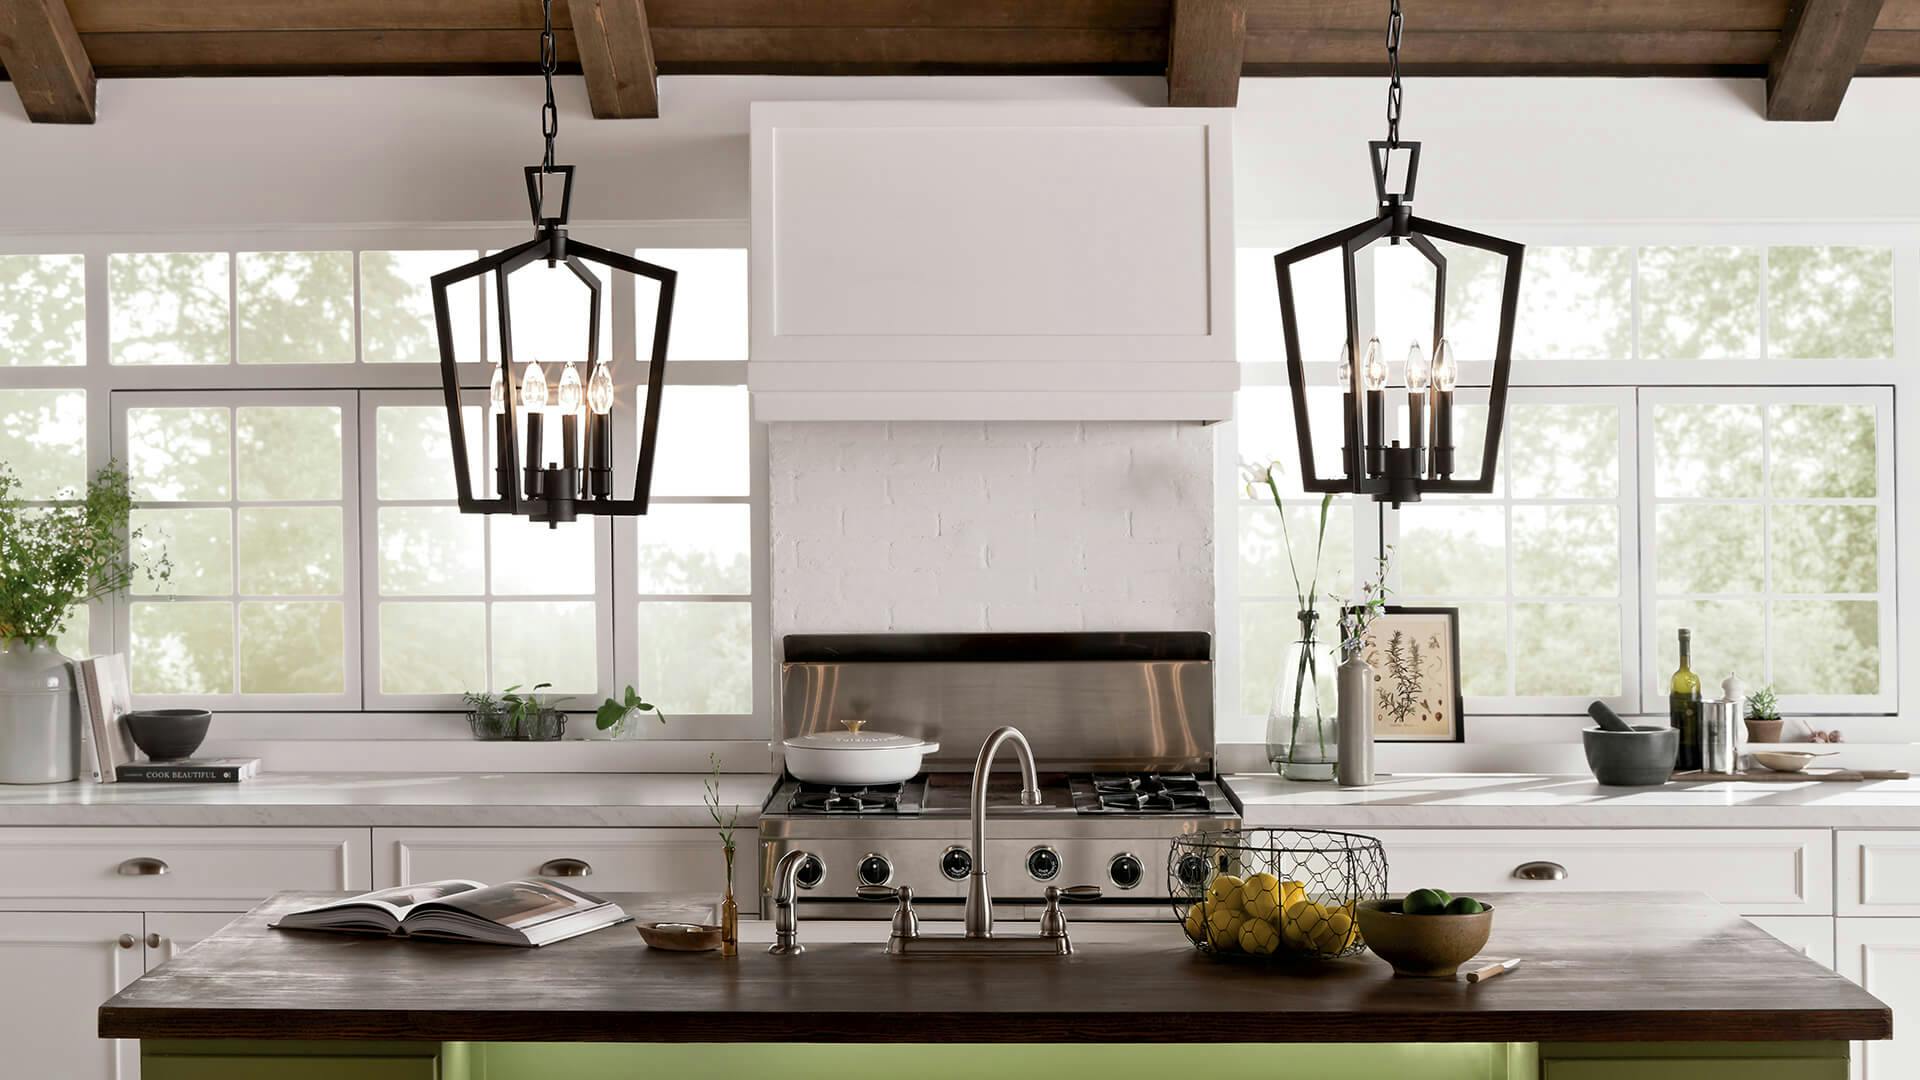 Rustic kitchen with white walls, green kitchen island, and Abbotswell pendant lamps in black finish